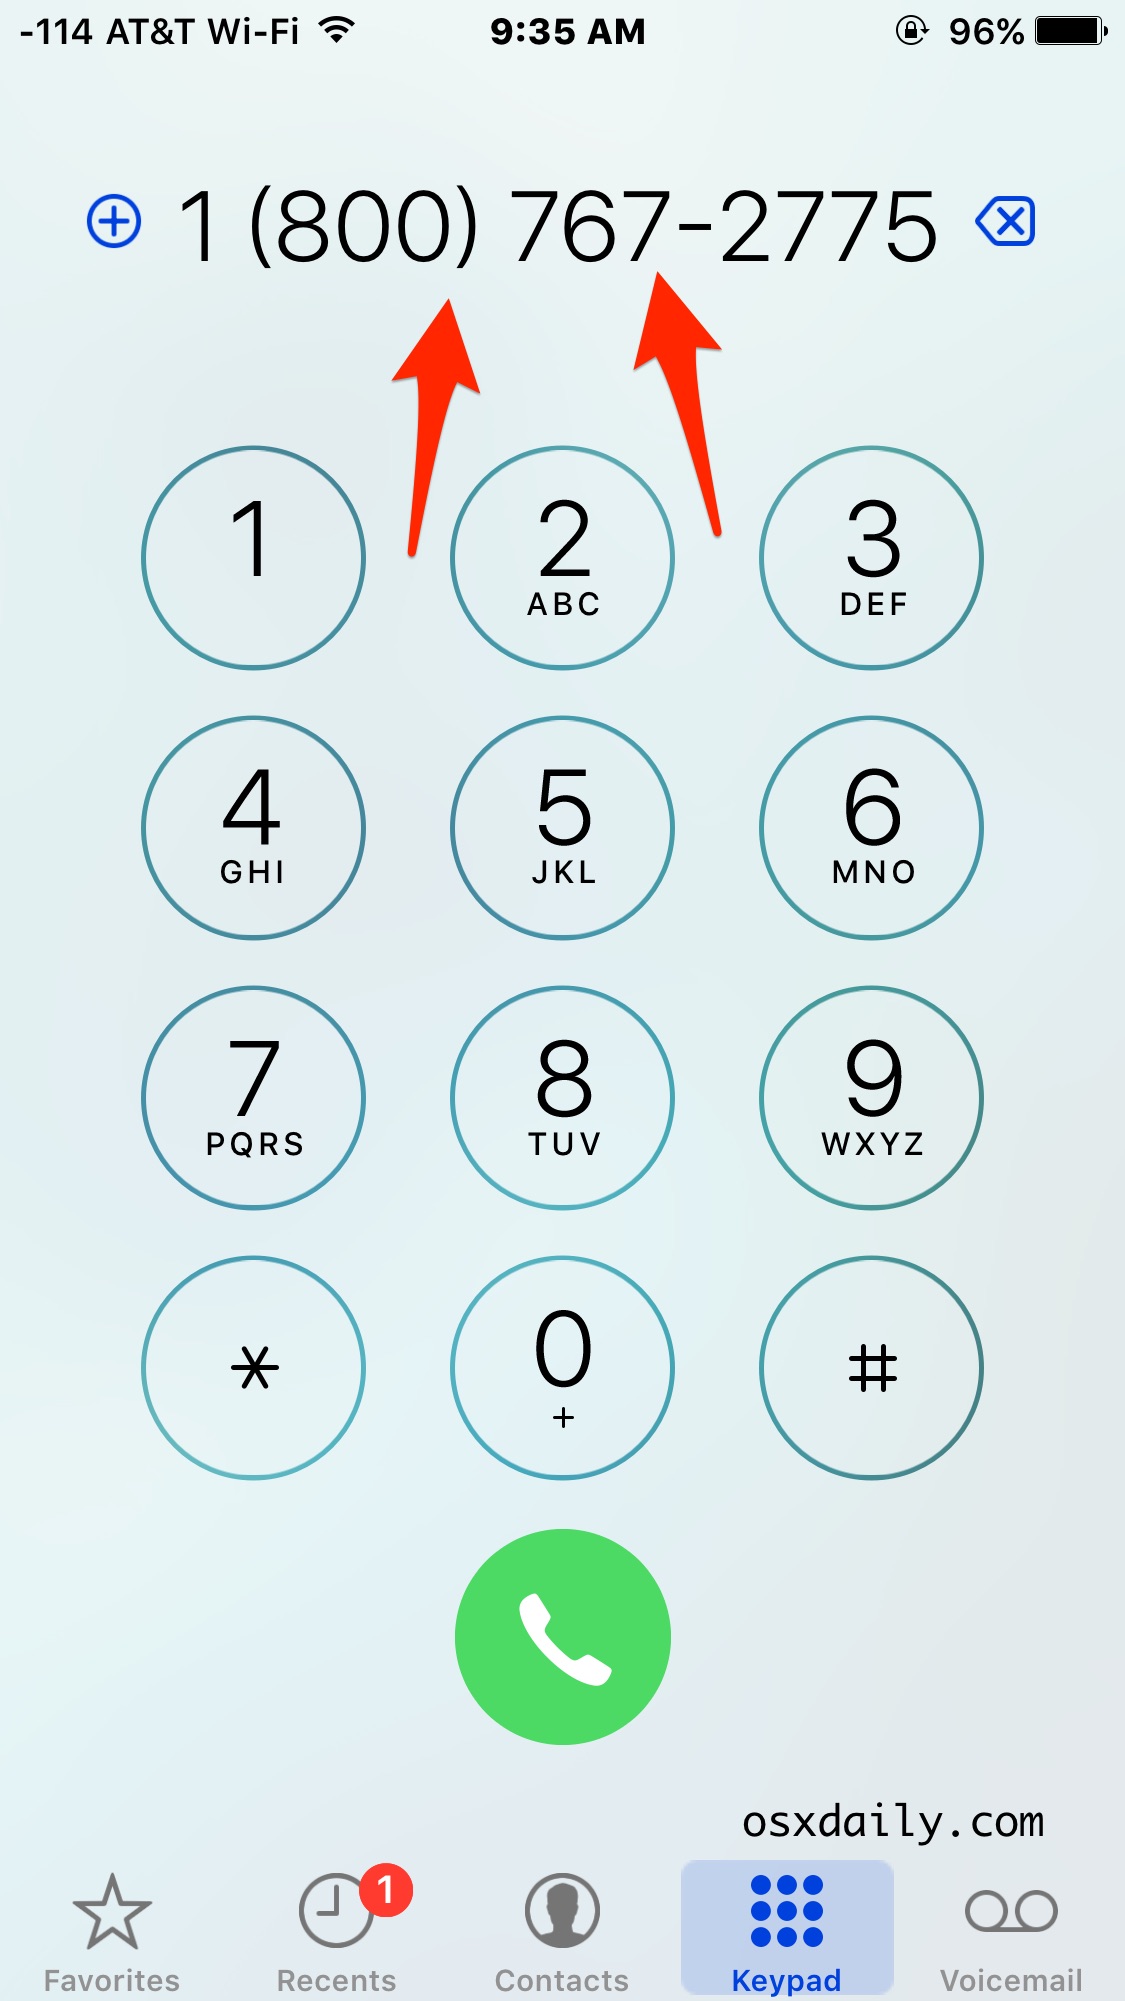 Redial The Last Called Phone Number On Iphone Quickly Osxdaily